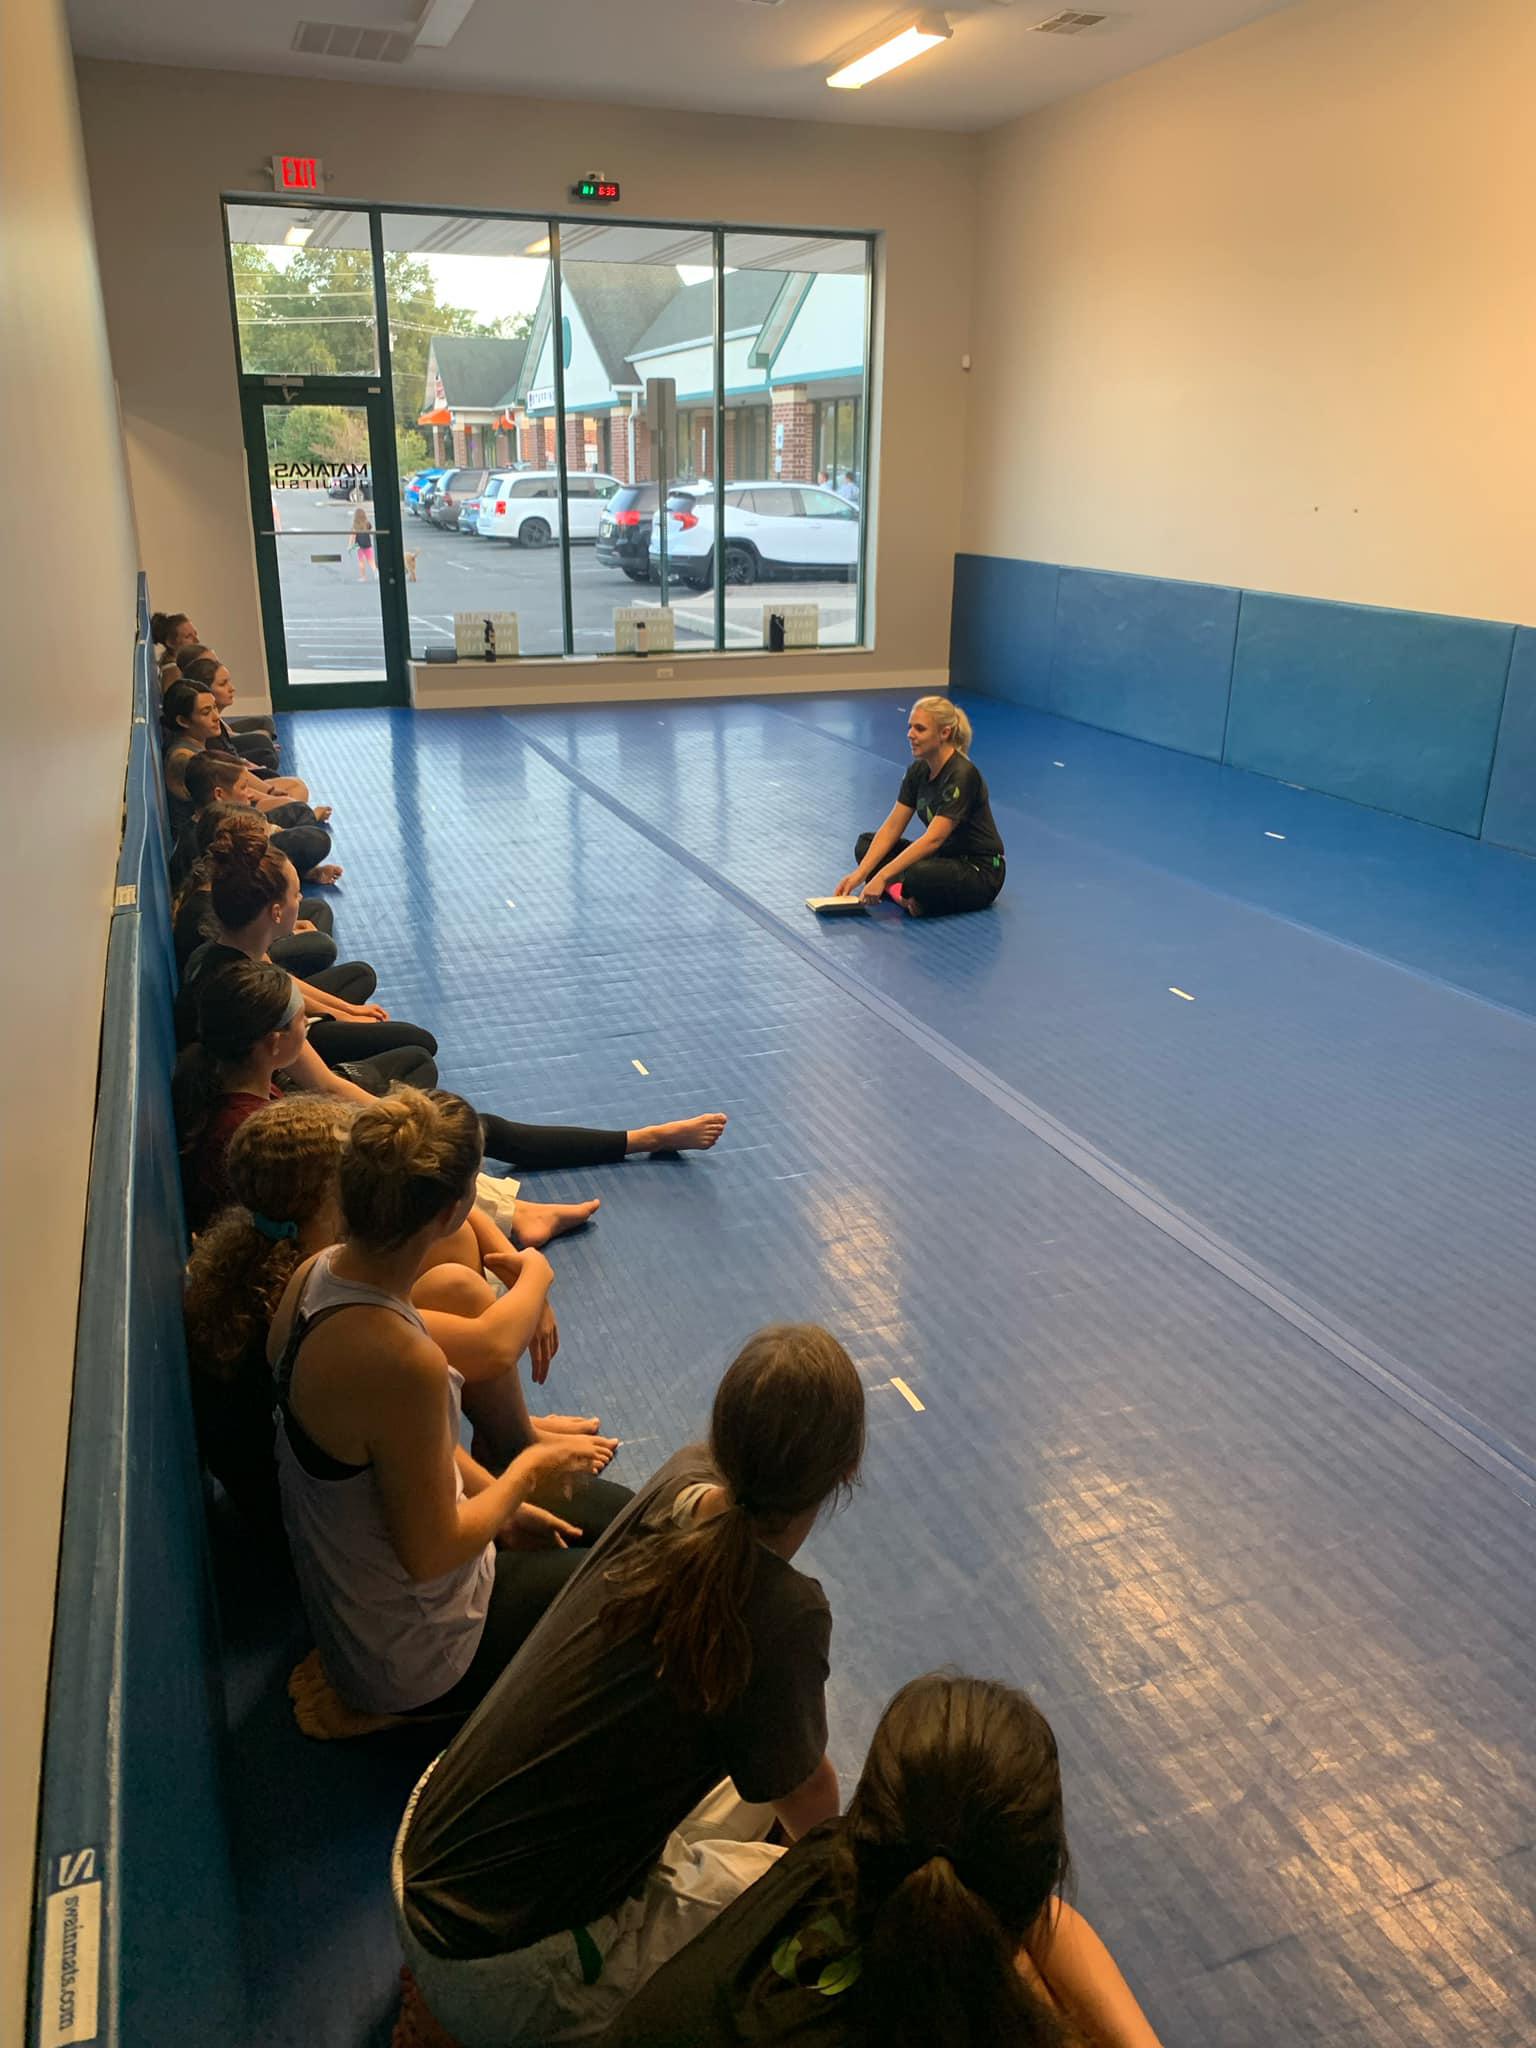 Coach Emma leading the way for our weekly Women's Self Defense Seminar! This is FREE to the community. Everyone has the right to feel safe. Everyone has the opportunity to learn world-class self-defense!